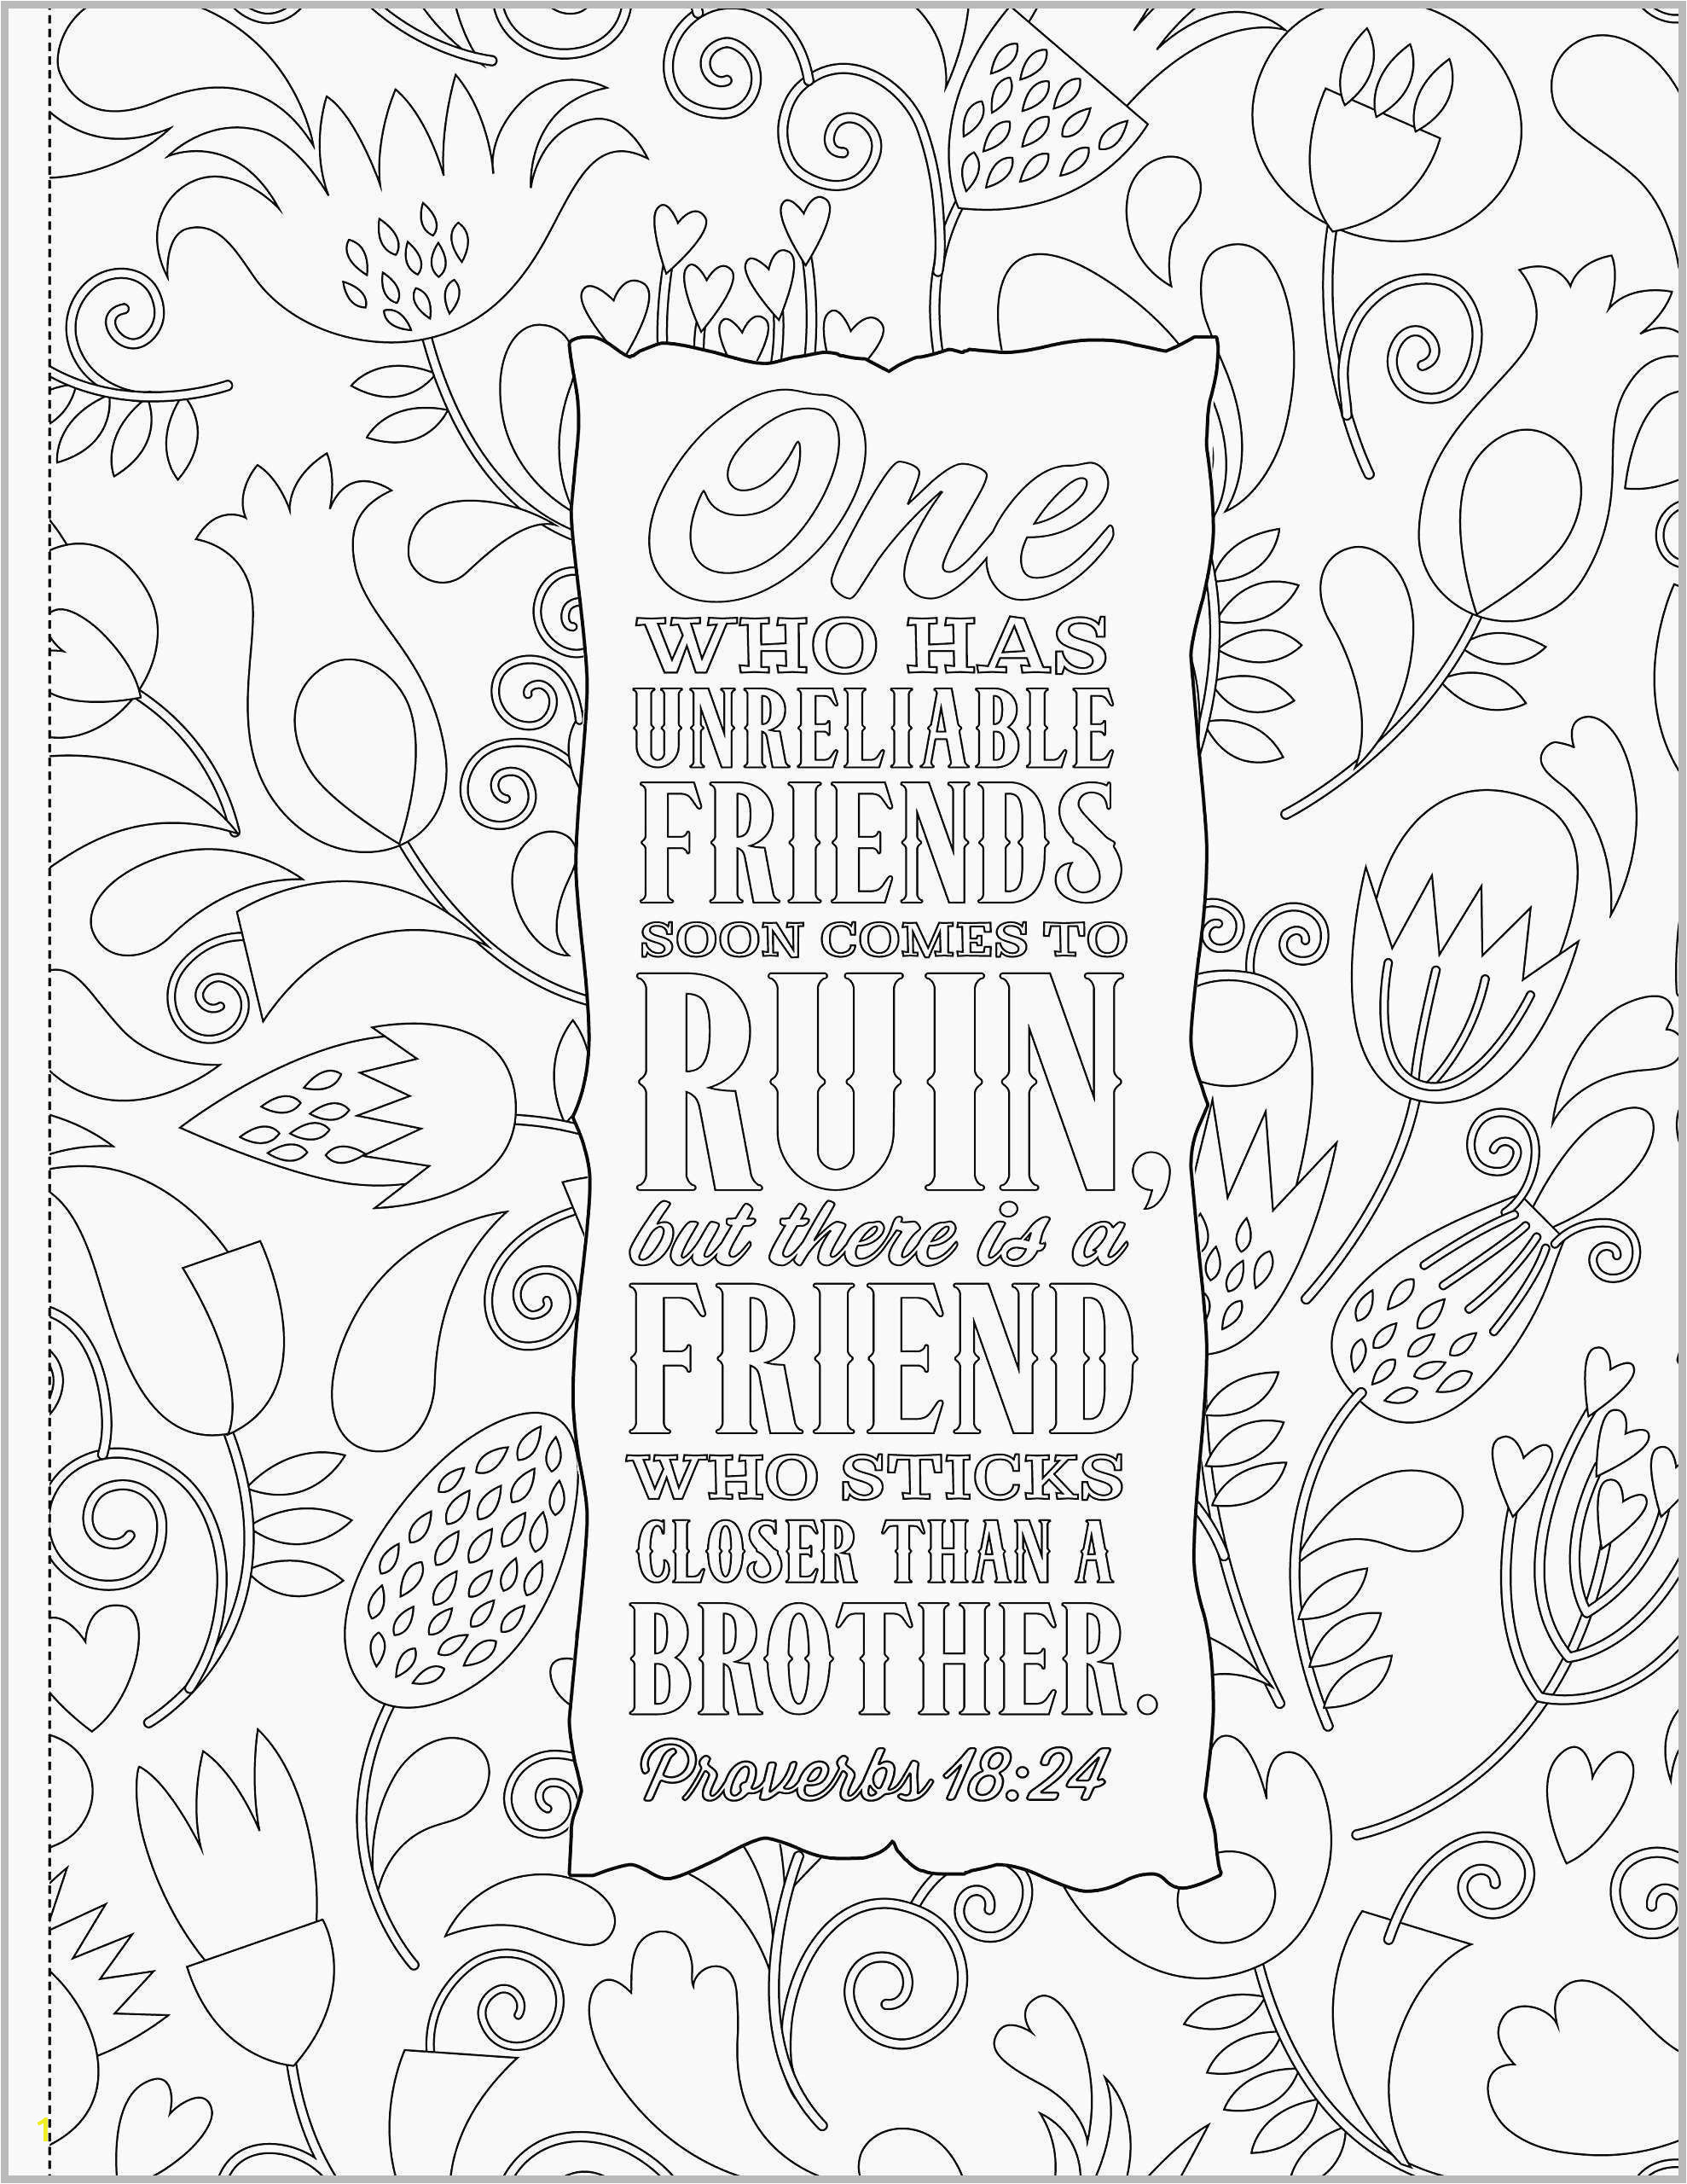 bible verse coloring pages for adults image inspirations pdf freetable easy sheets fall in spanish preschoolers